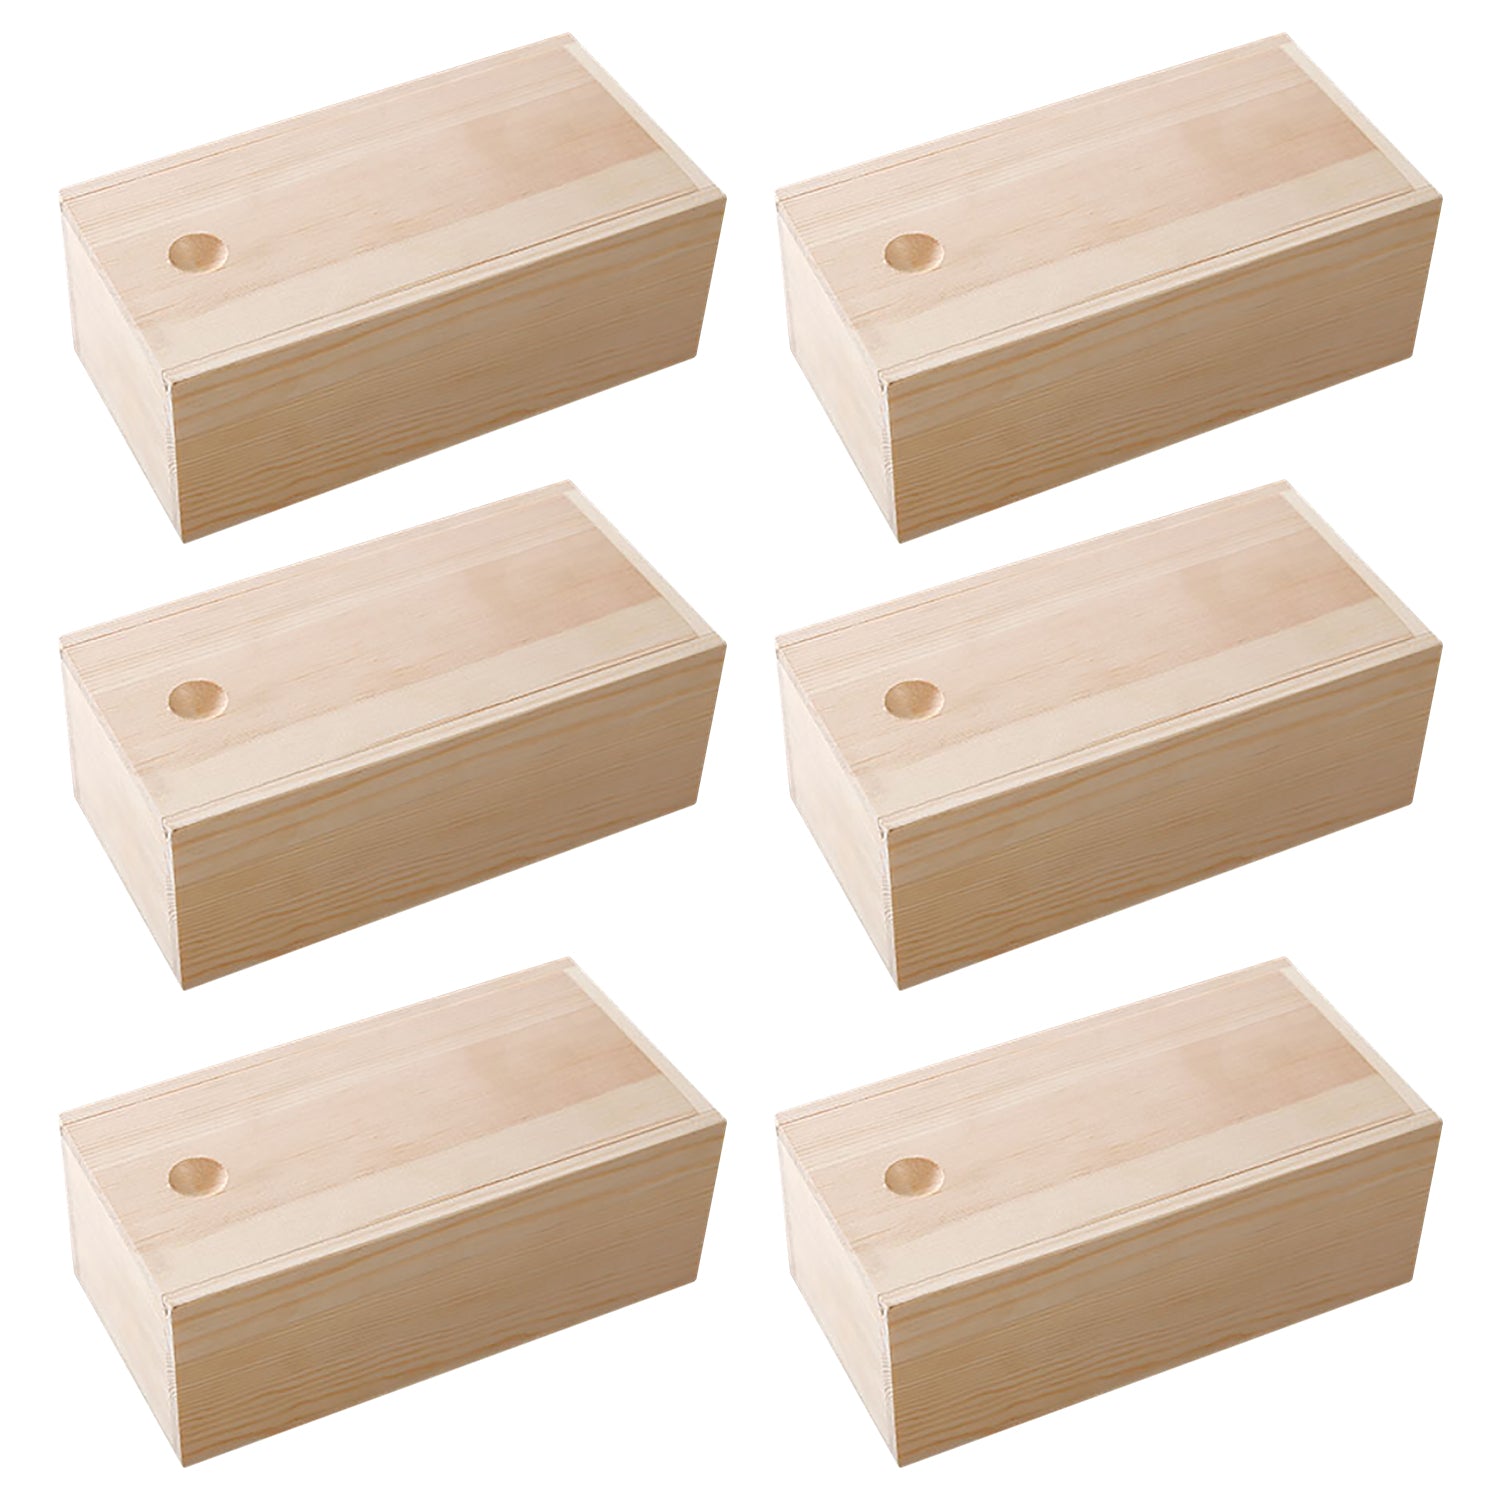 Small Wooden Storage Box with Lid